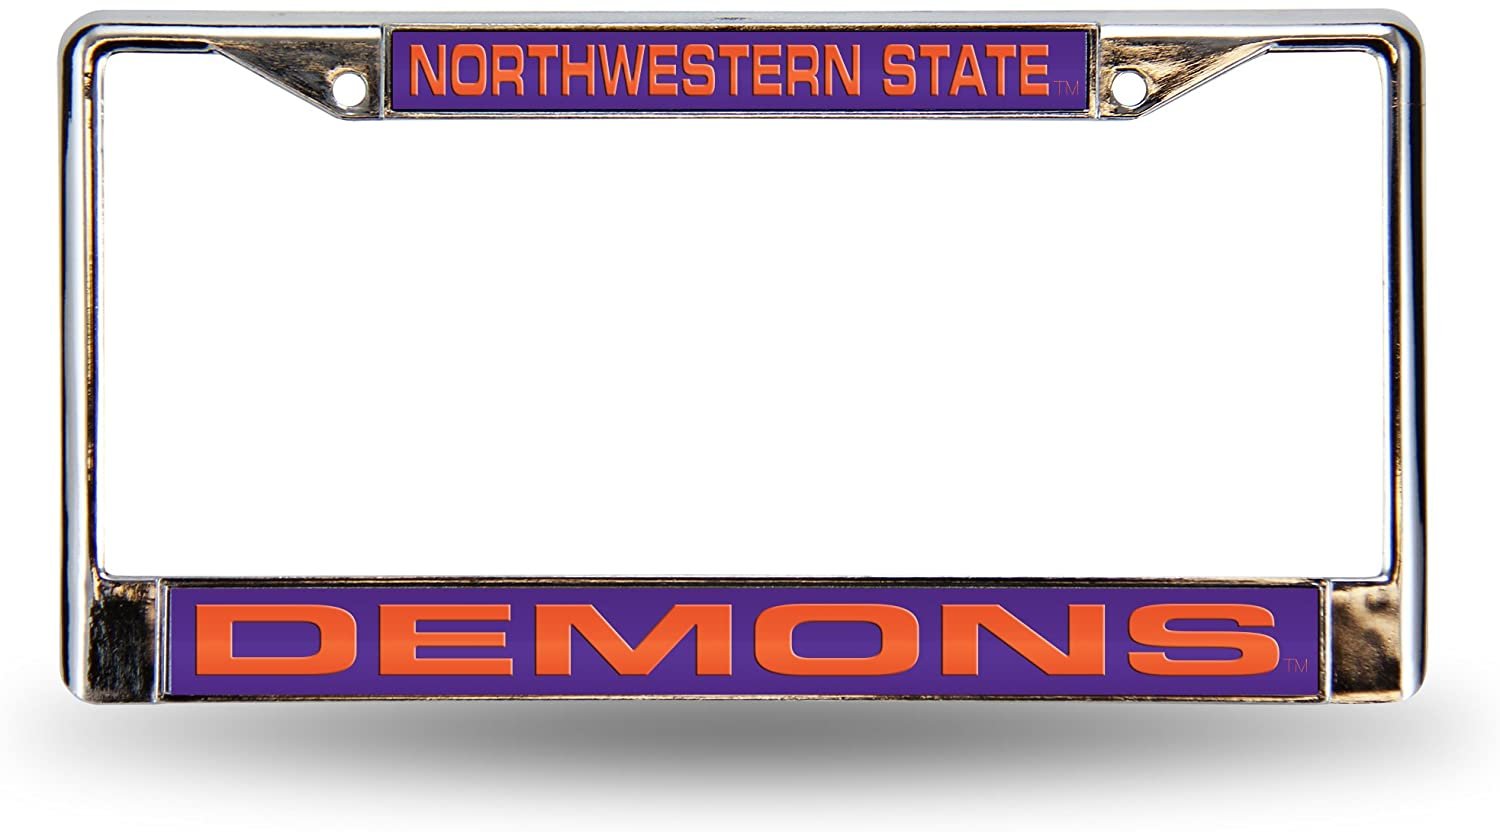 Wake Forest University Demon Deacons Chrome Metal License Plate Frame Tag Cover, Laser Acrylic Mirrored Inserts, 12x6 Inch